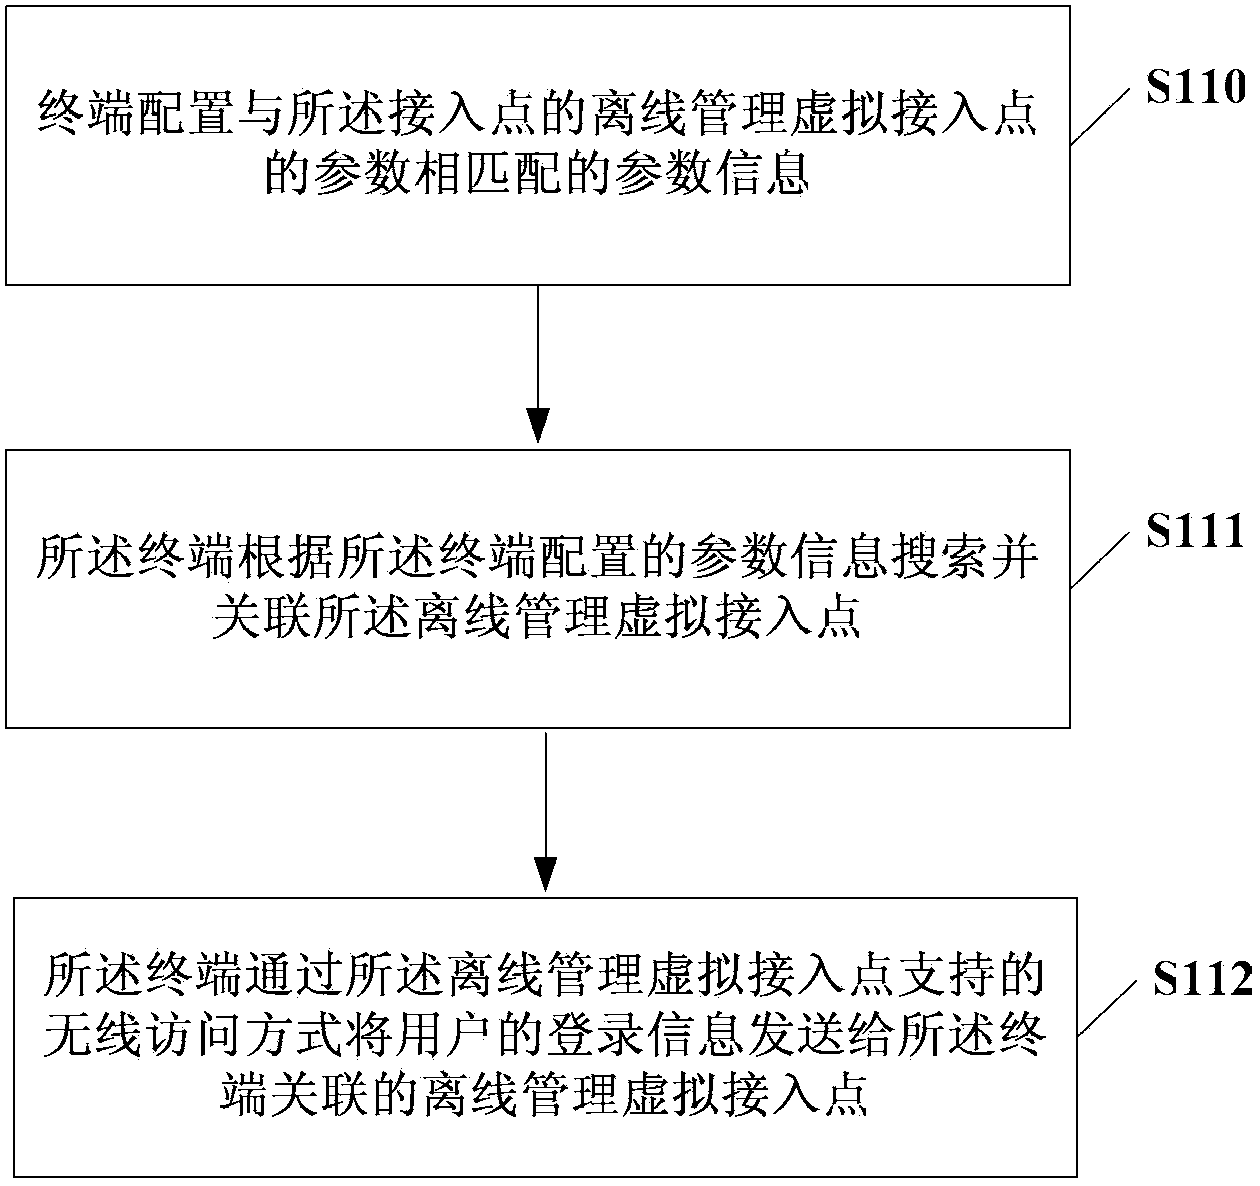 Access point visiting method and related equipment